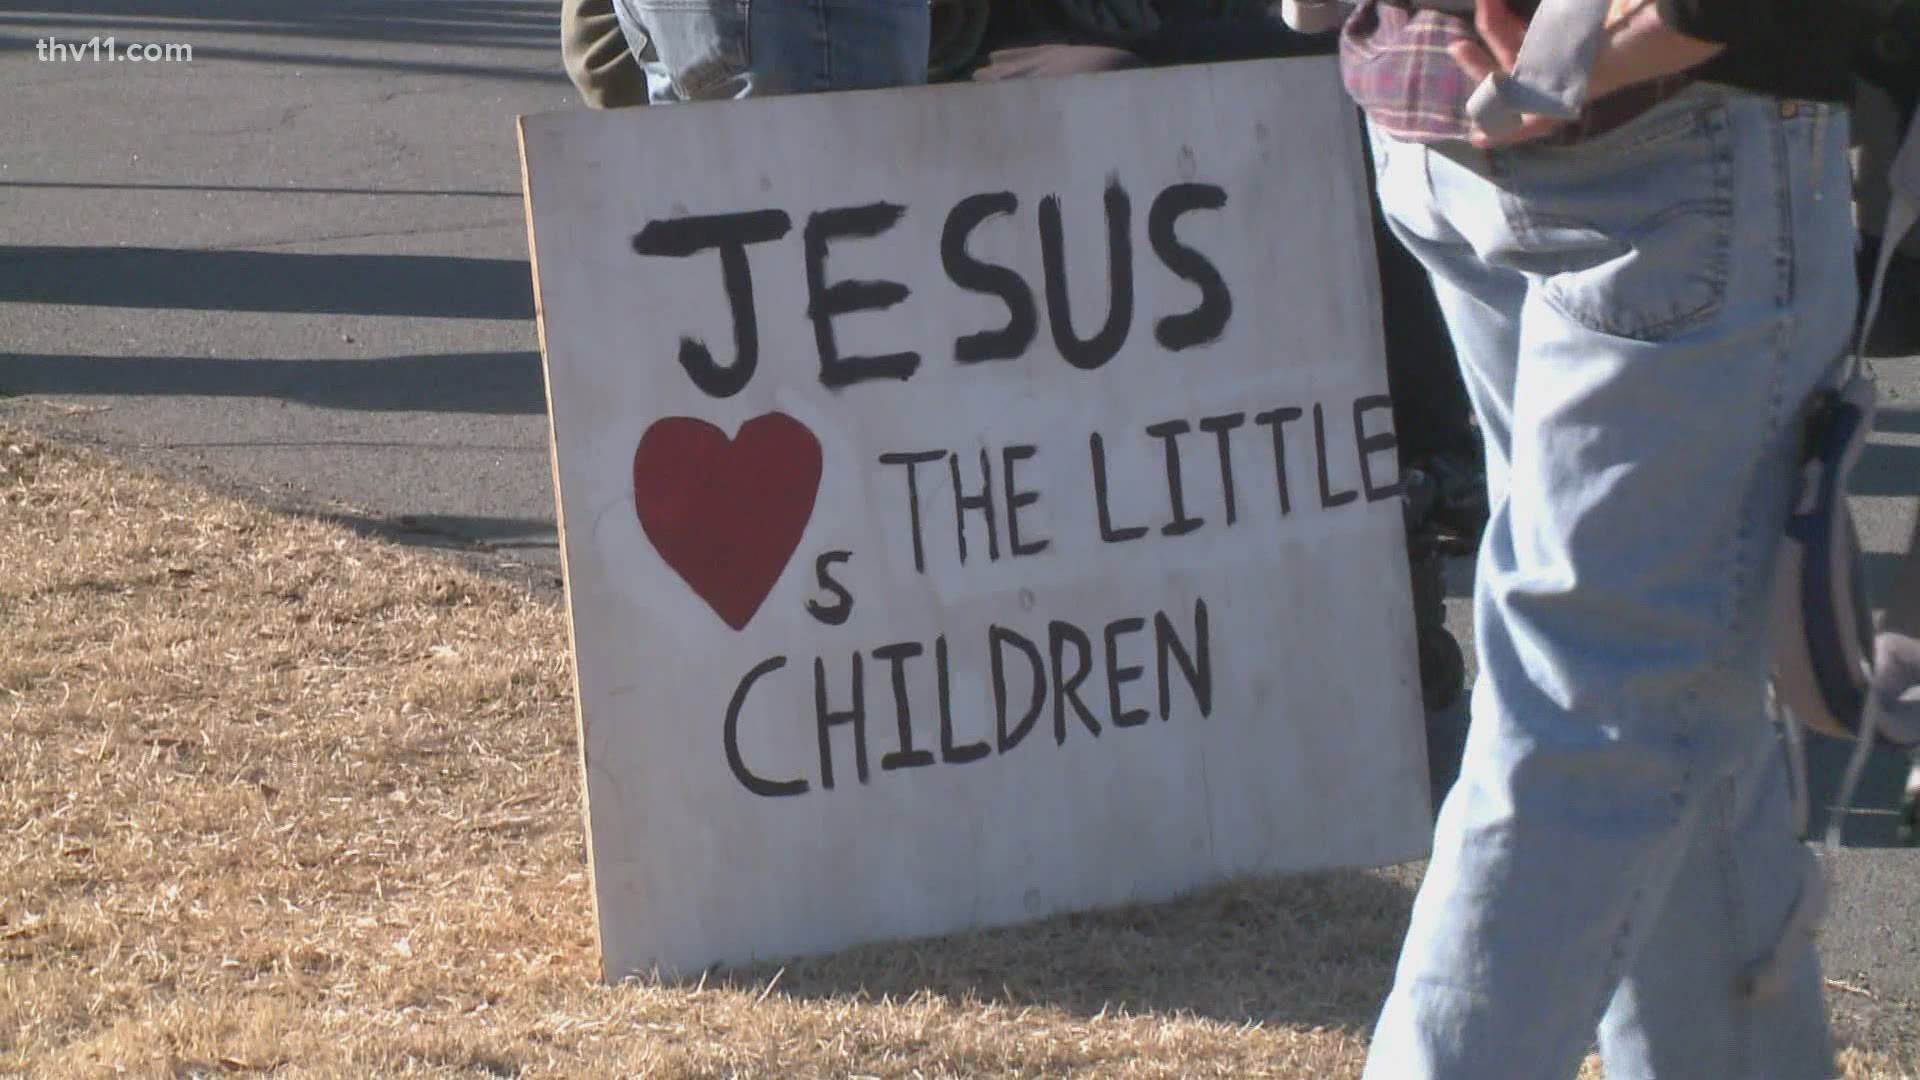 Police arrested a group of protesters outside the Little Rock Family Planning Services building.